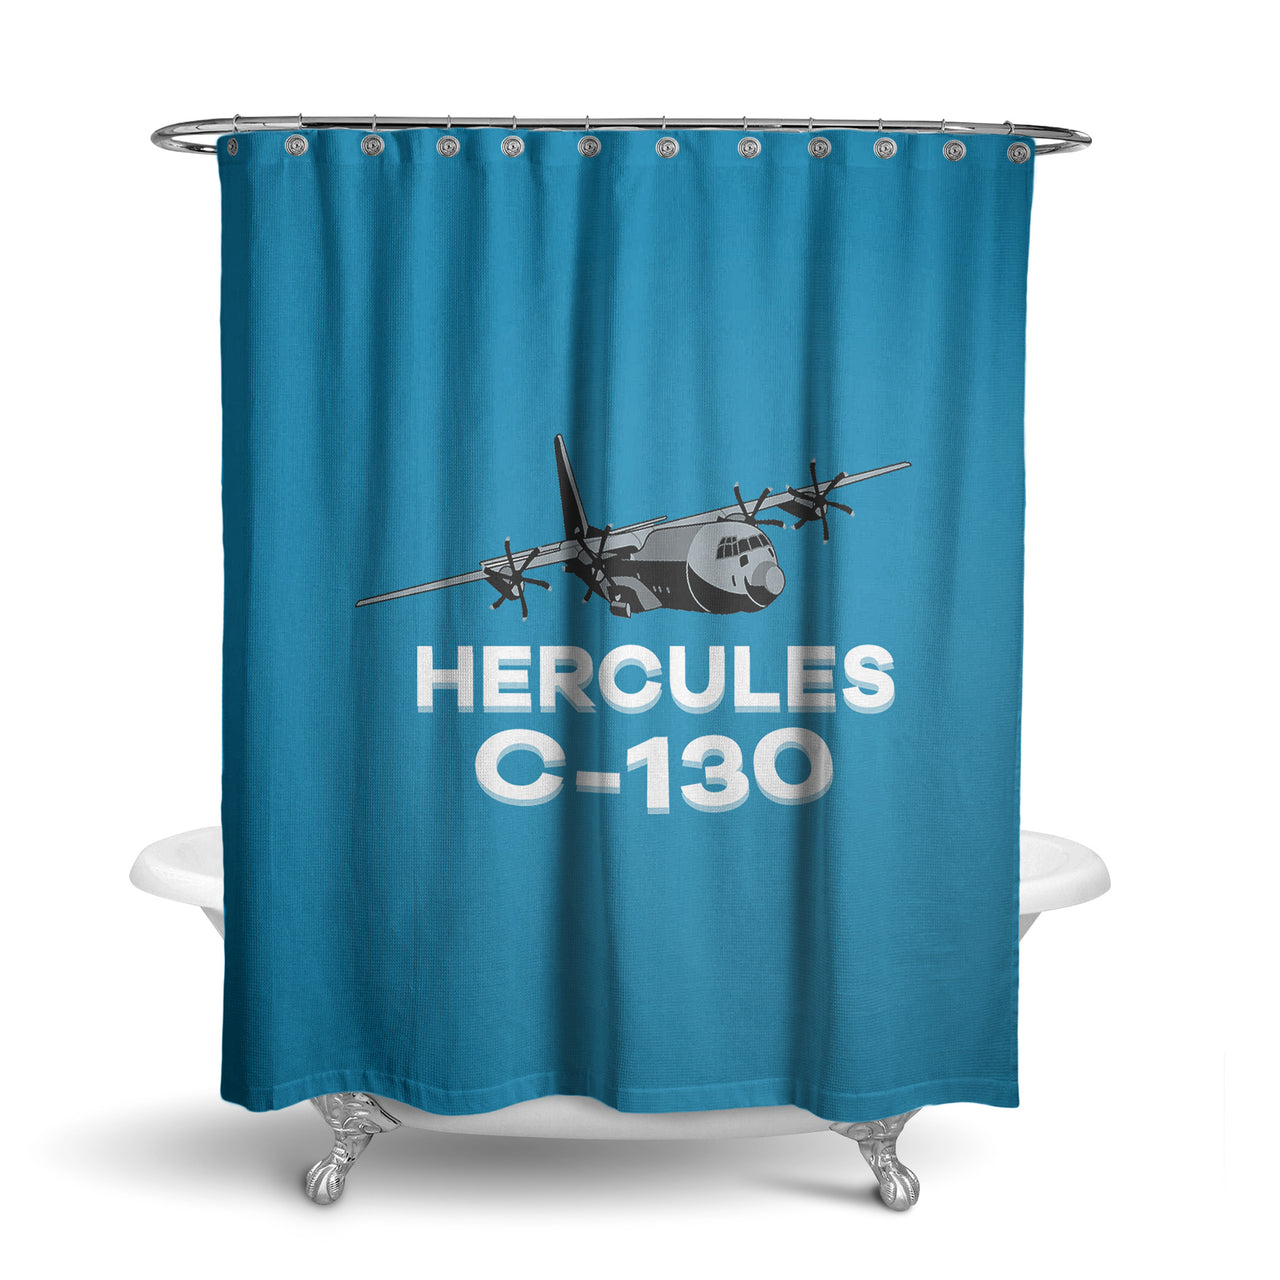 The Hercules C130 Designed Shower Curtains